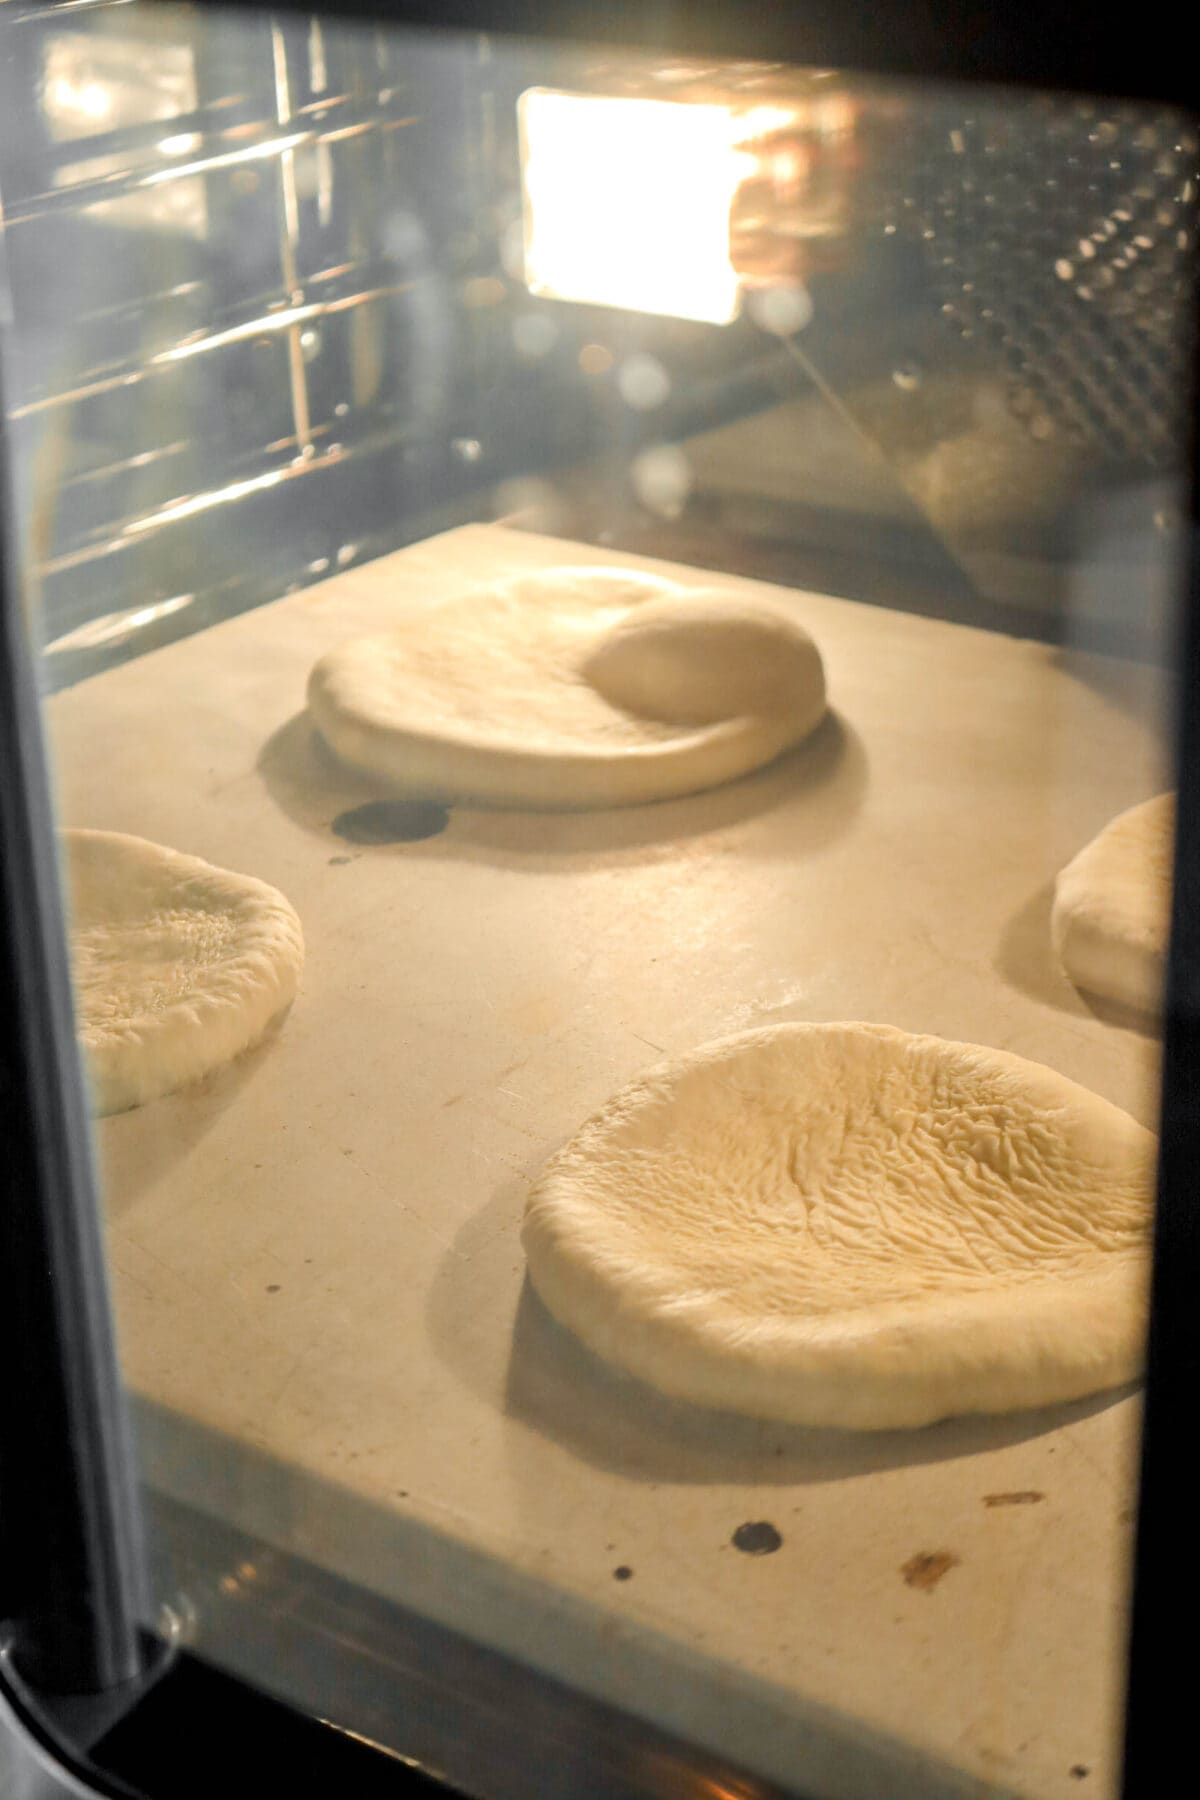 four flat and unbaked pitas in oven on stone